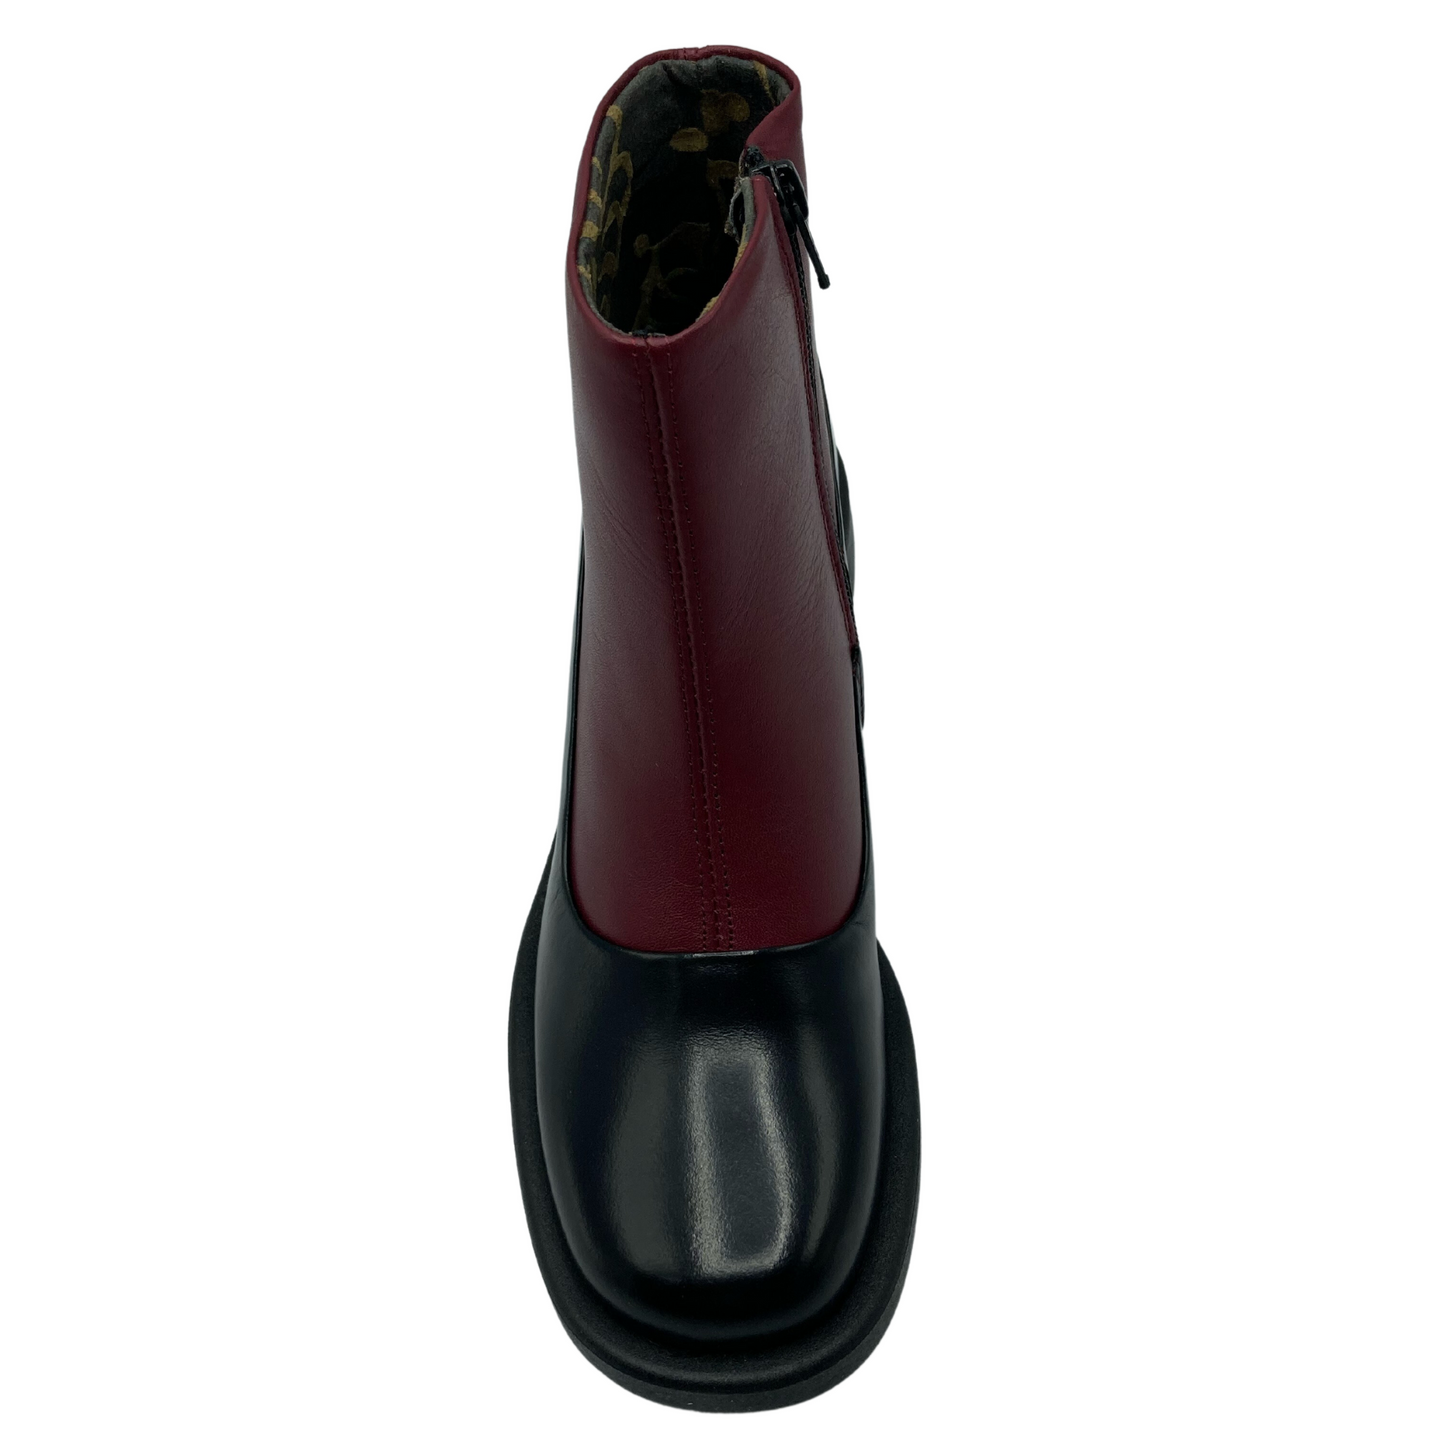 Top view of black and red leather short boot with rounded toe and black sole